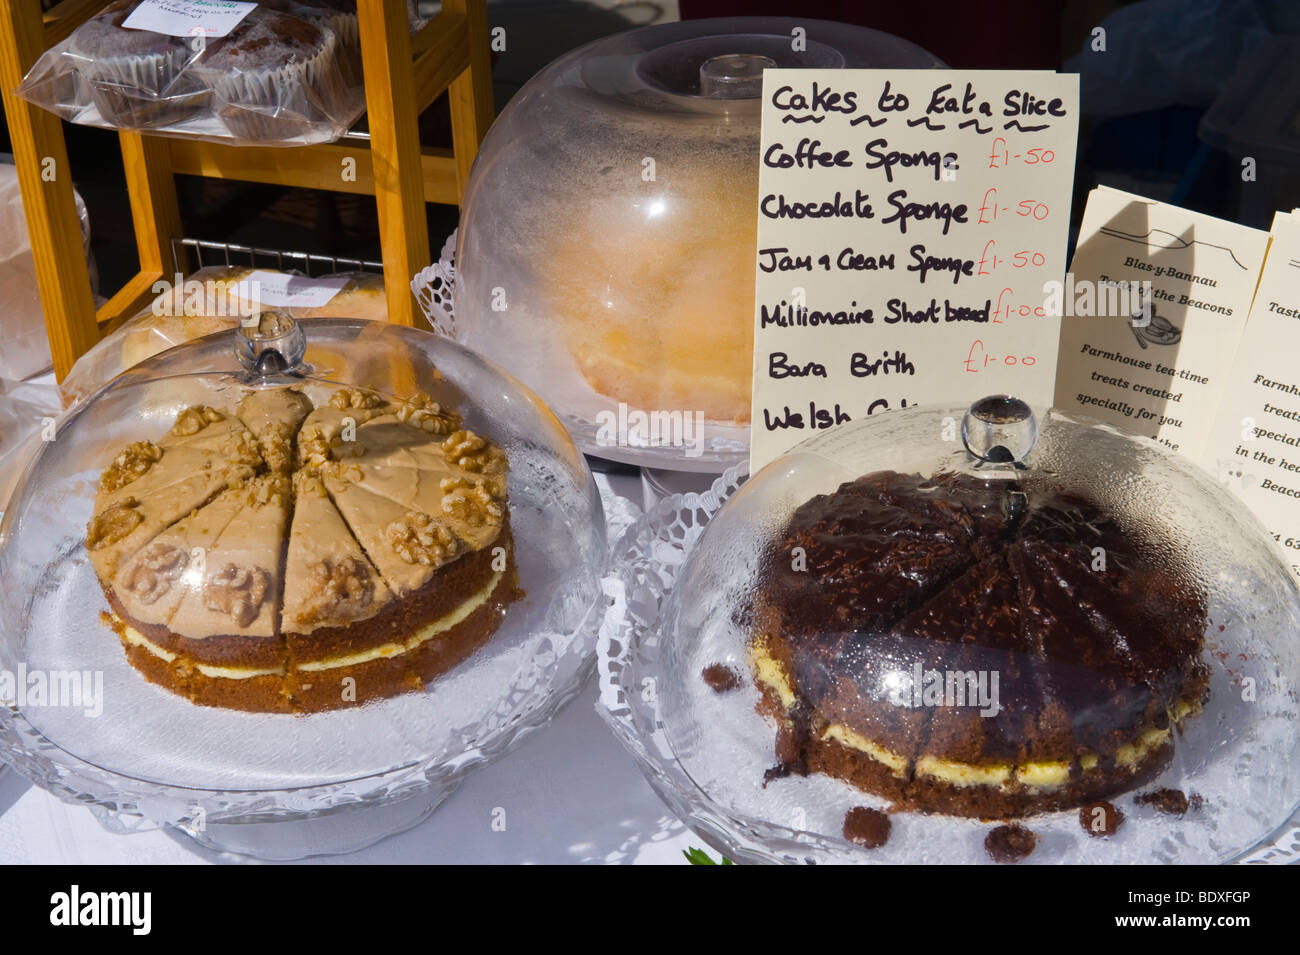 Cakes for sale at farmers market in UK Stock Photo